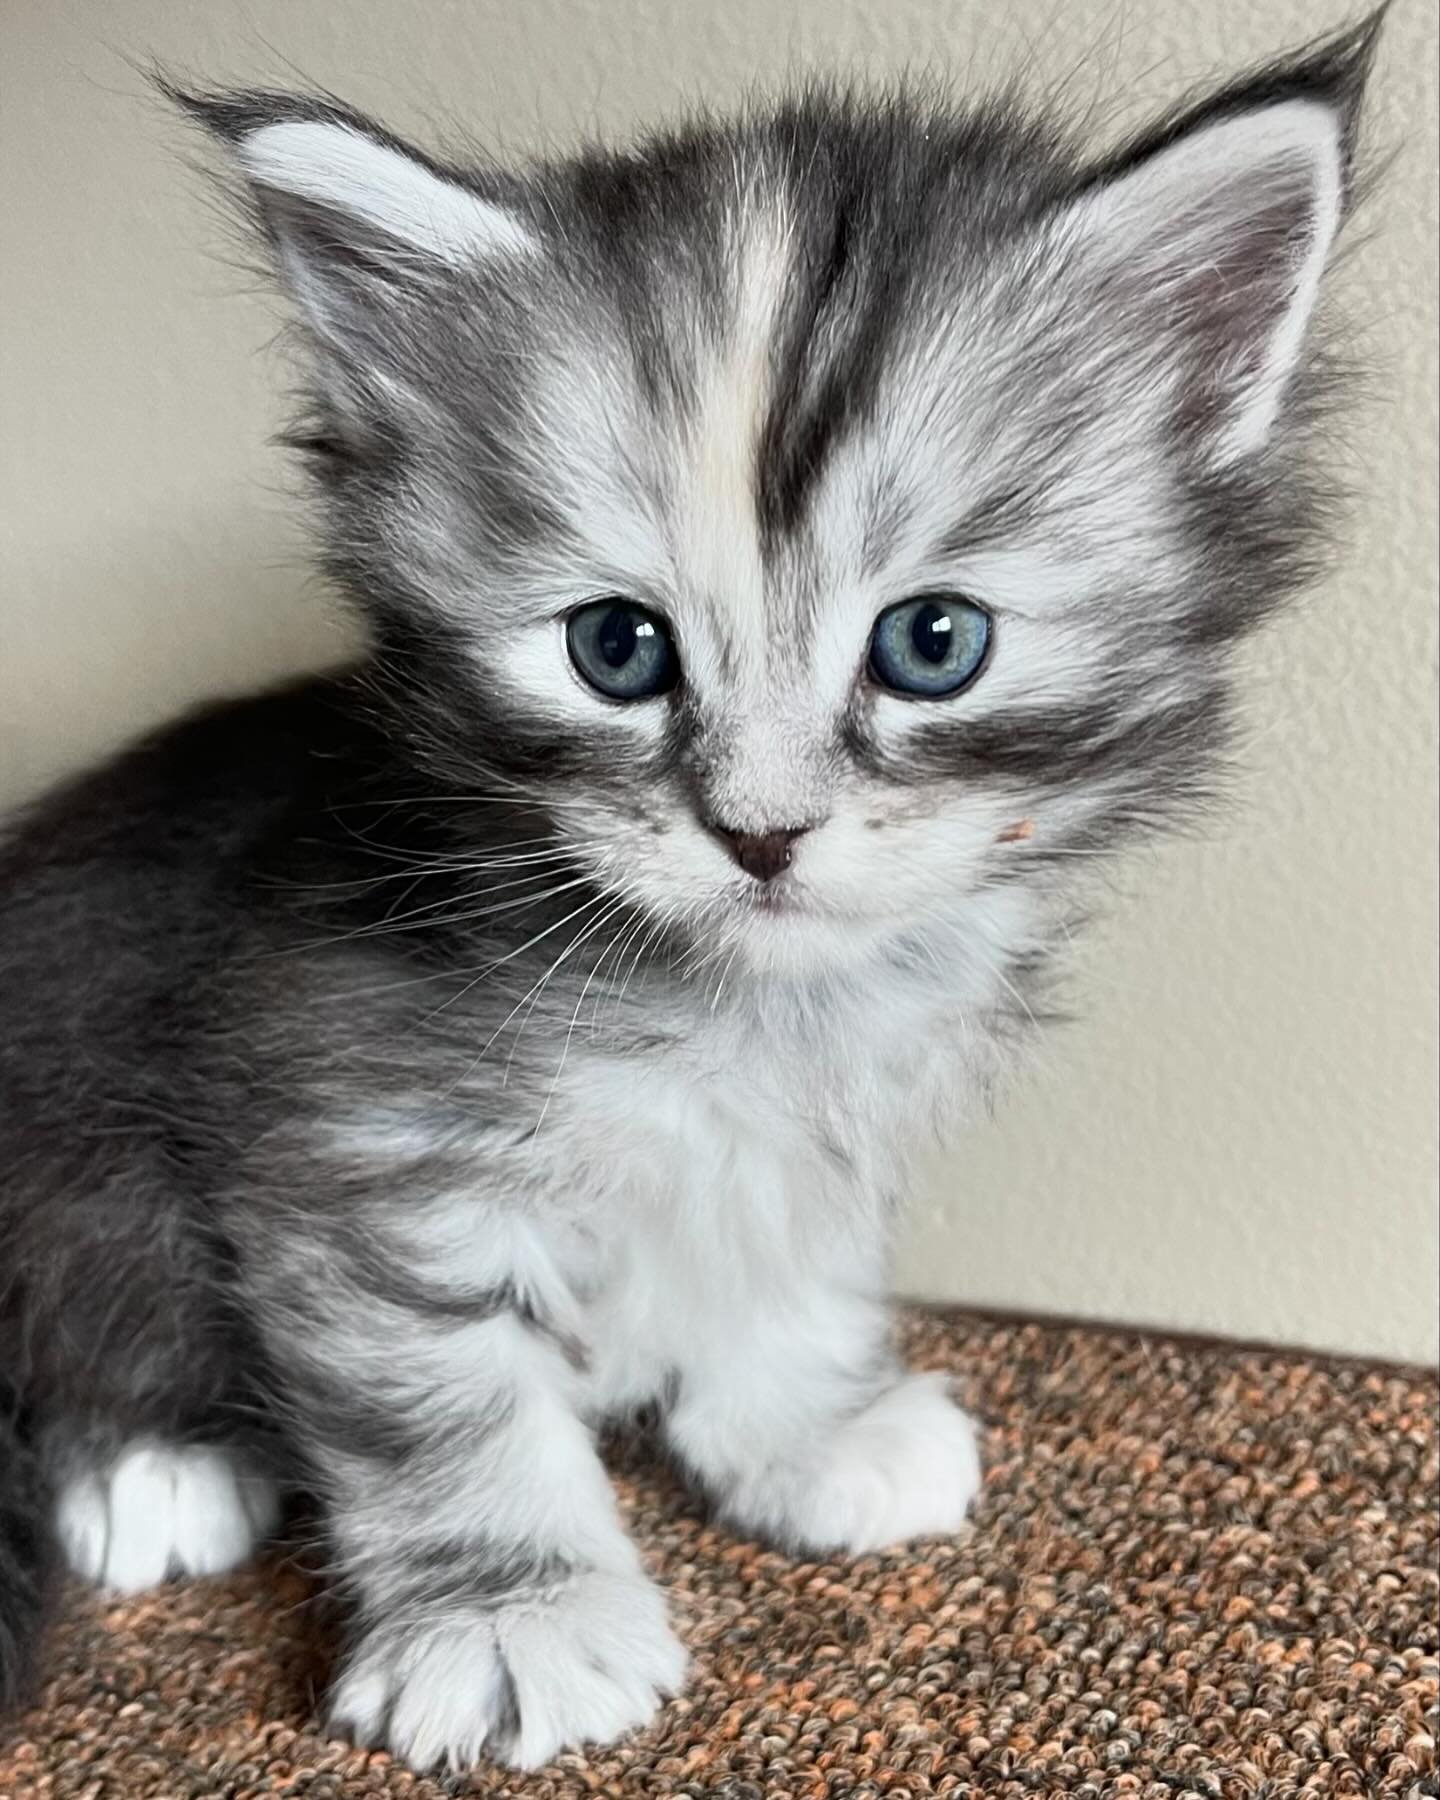 ✨FEATURED KITTEN✨
High Country Maine Coons &ldquo;Astra&rdquo;
Silver classic tabby ~ Female
&bull;
Astra is one of two girls in this litter! She is a sweetheart and has the best personality. She is looking for her FURever home!
&bull; 
LINK IN BIO T